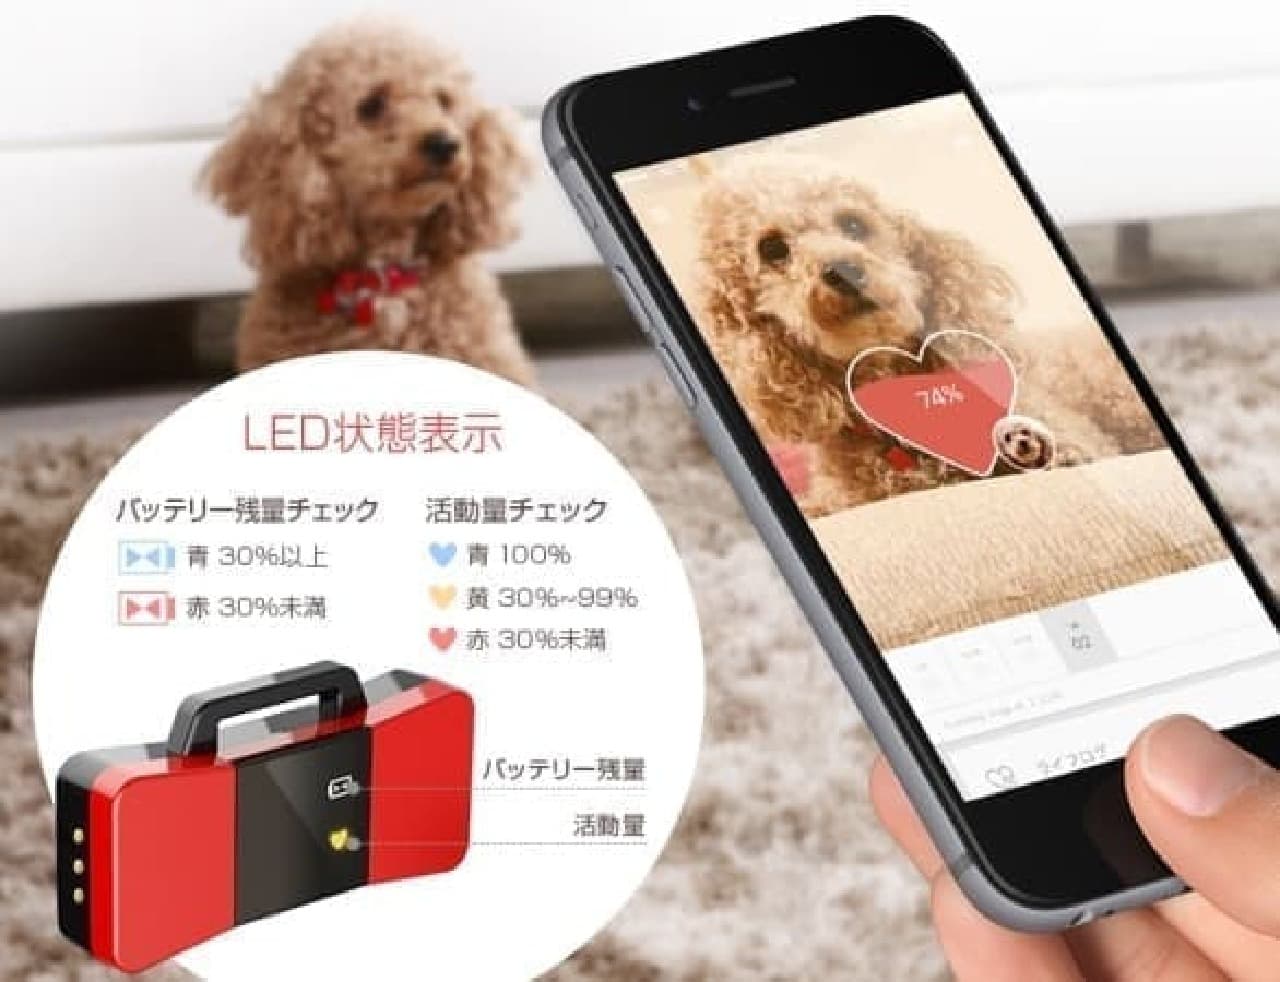 Activity meter for pets "ChouPet"